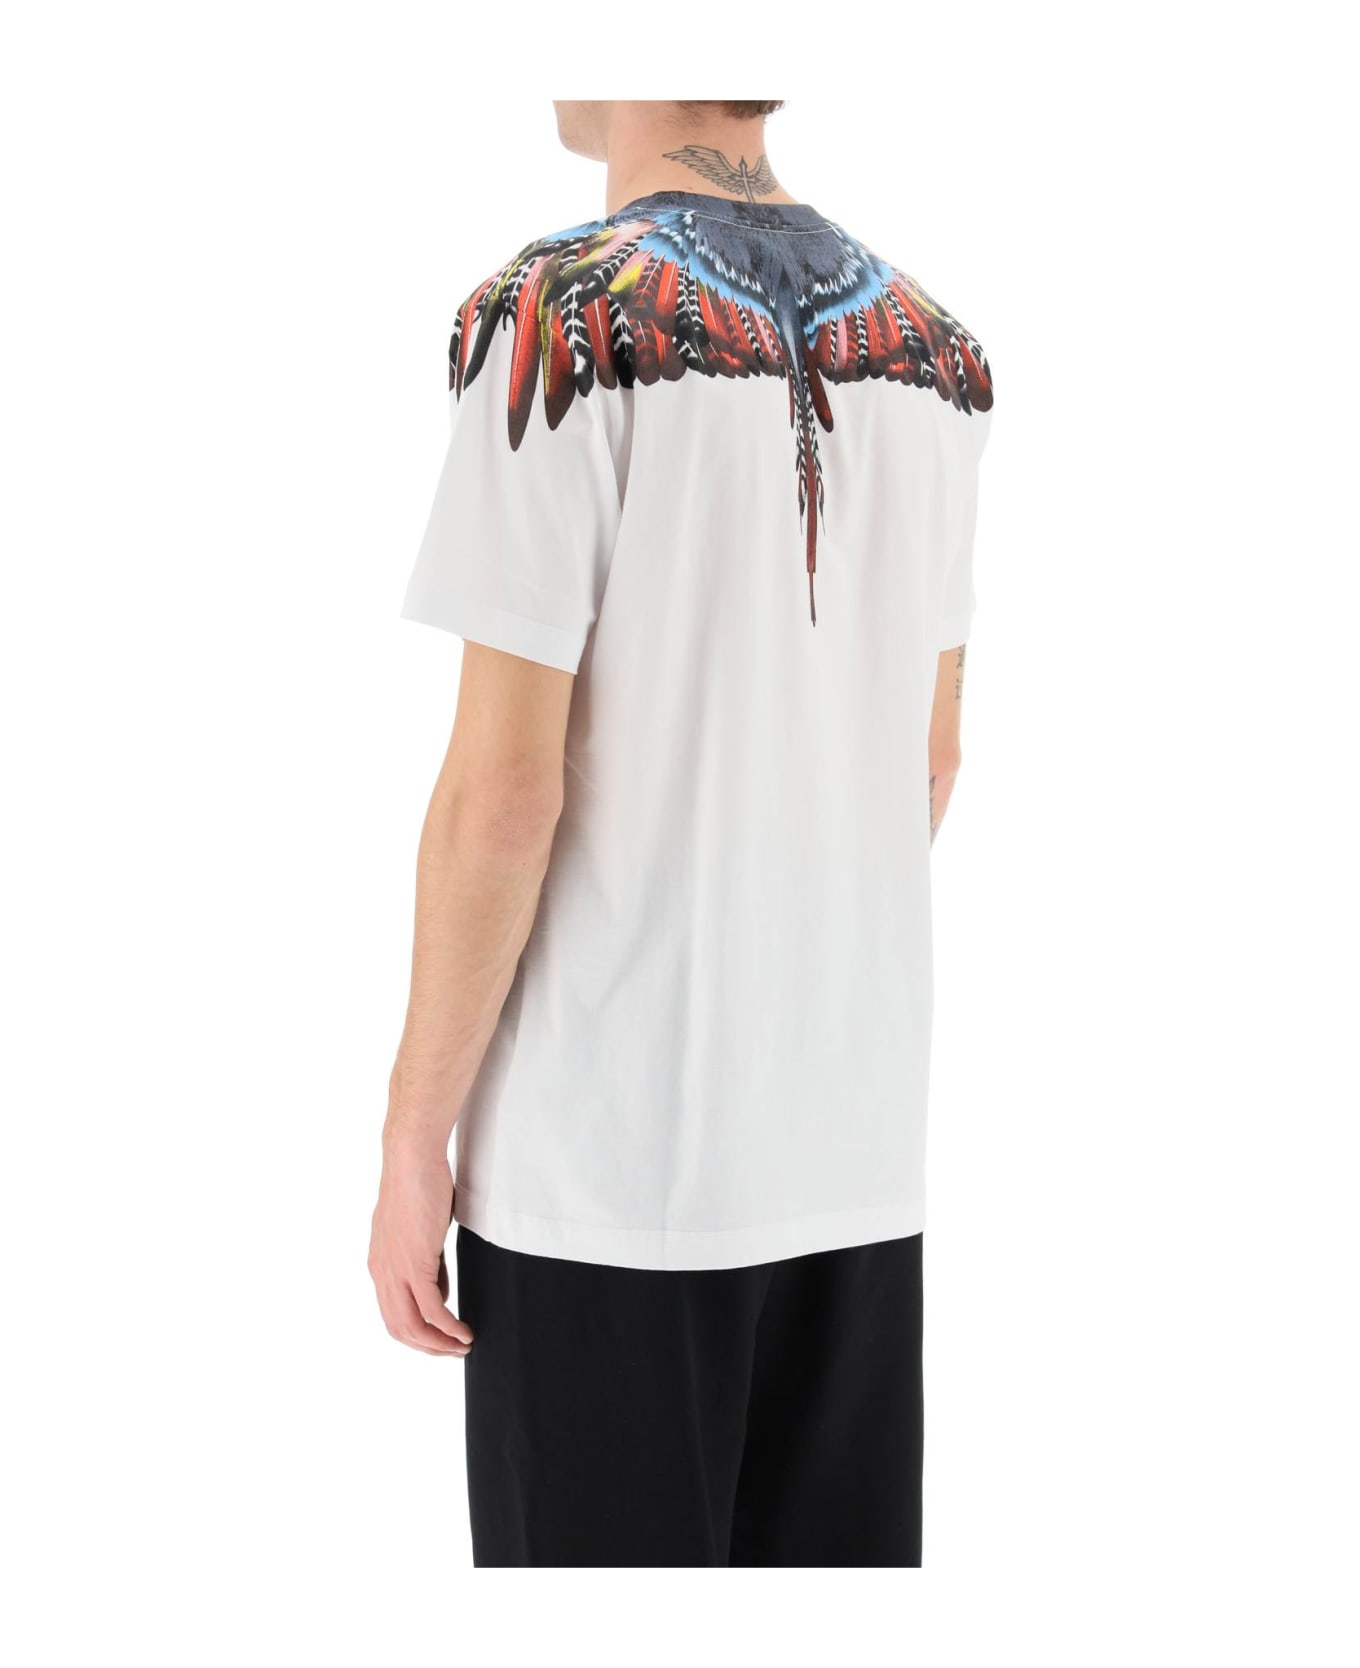 Marcelo Burlon T-shirt With Multicolor Wings - White Red シャツ